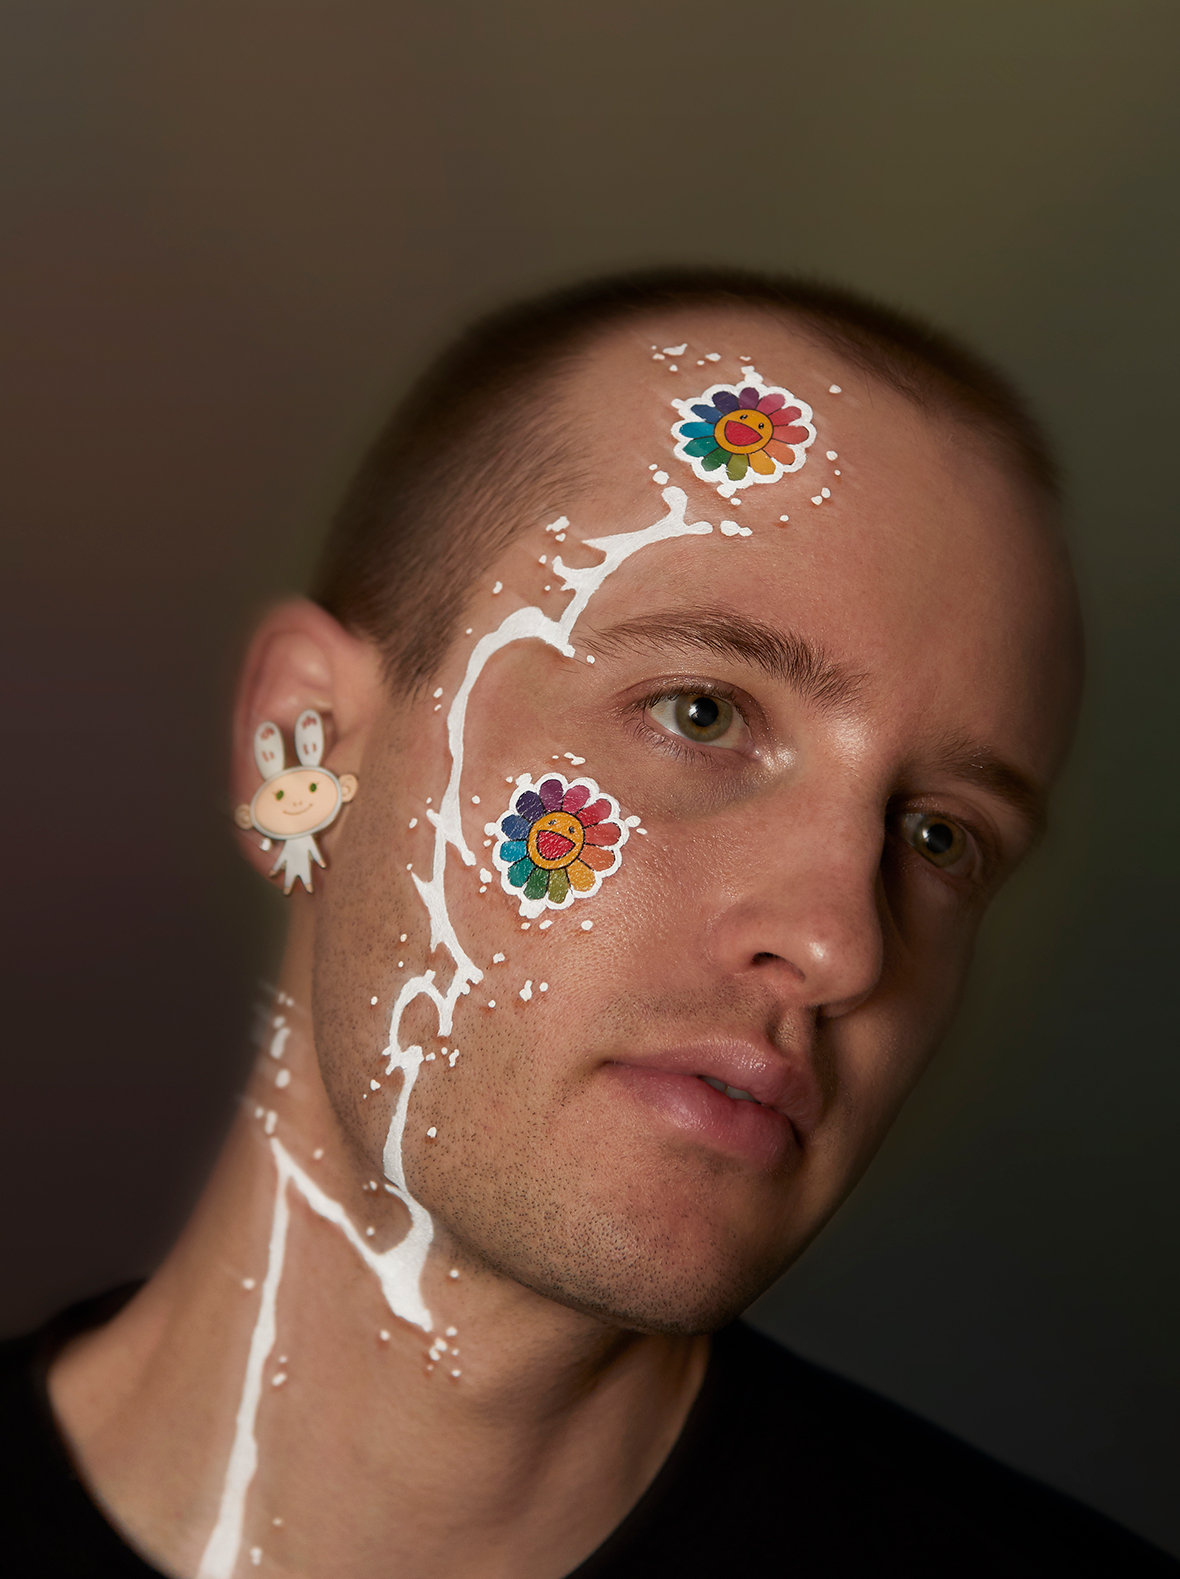 Jesse Clark from the neck up with a Takashi Murakami inspired makeup design